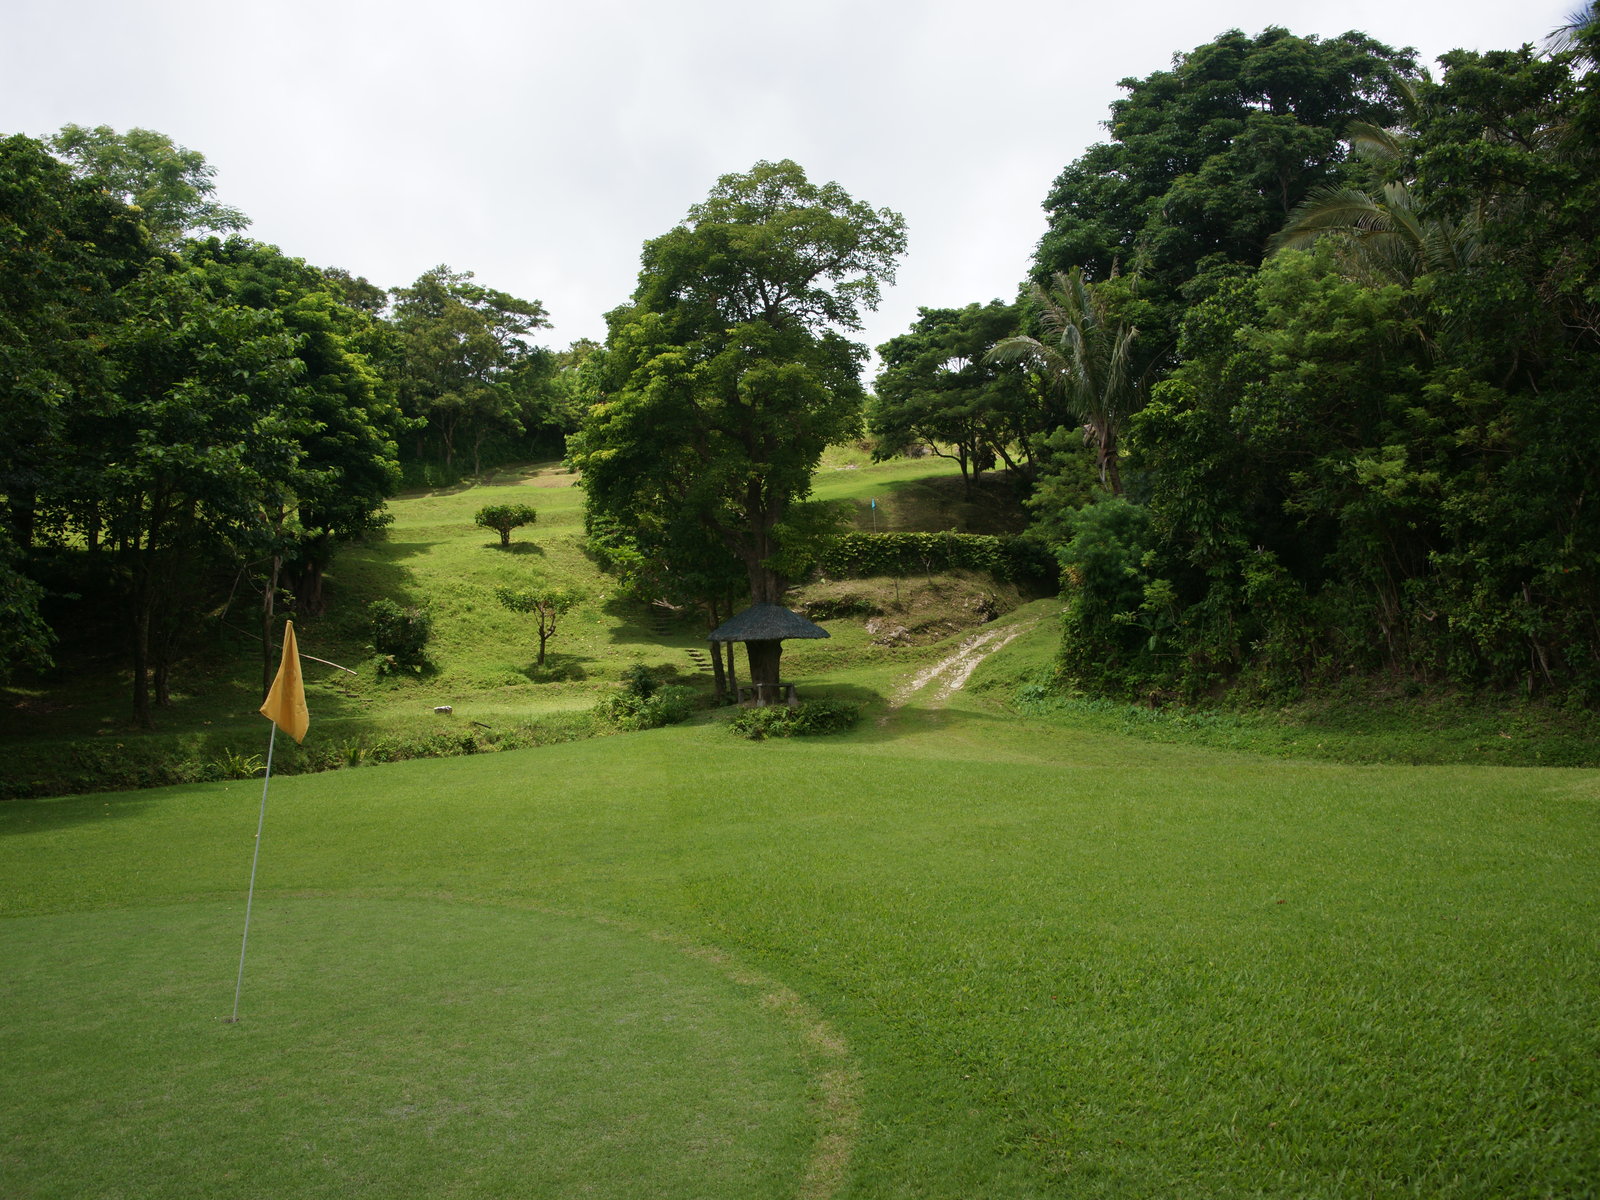 All Below Golf Sceneries Are From Course Ponderosa Puerto Galera